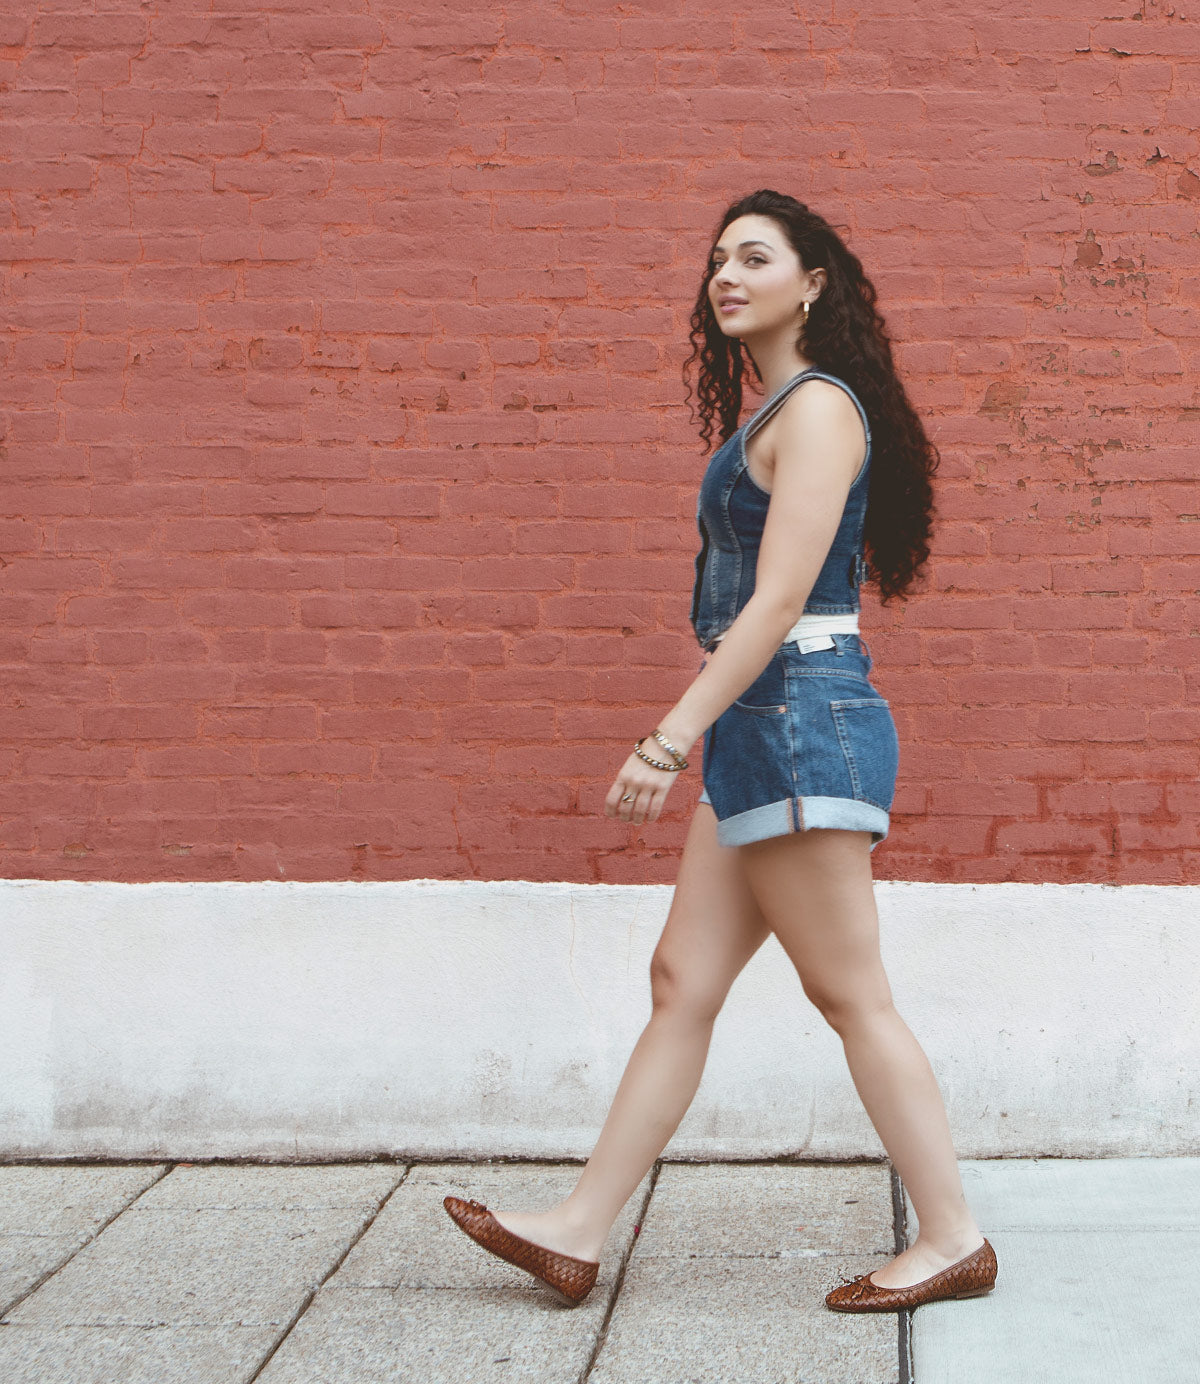 
                  
                    A person with long curly hair wearing a blue sleeveless top, shorts, and Roan Business slip-on ballerina shoes walks on a sidewalk in front of a red brick wall.
                  
                